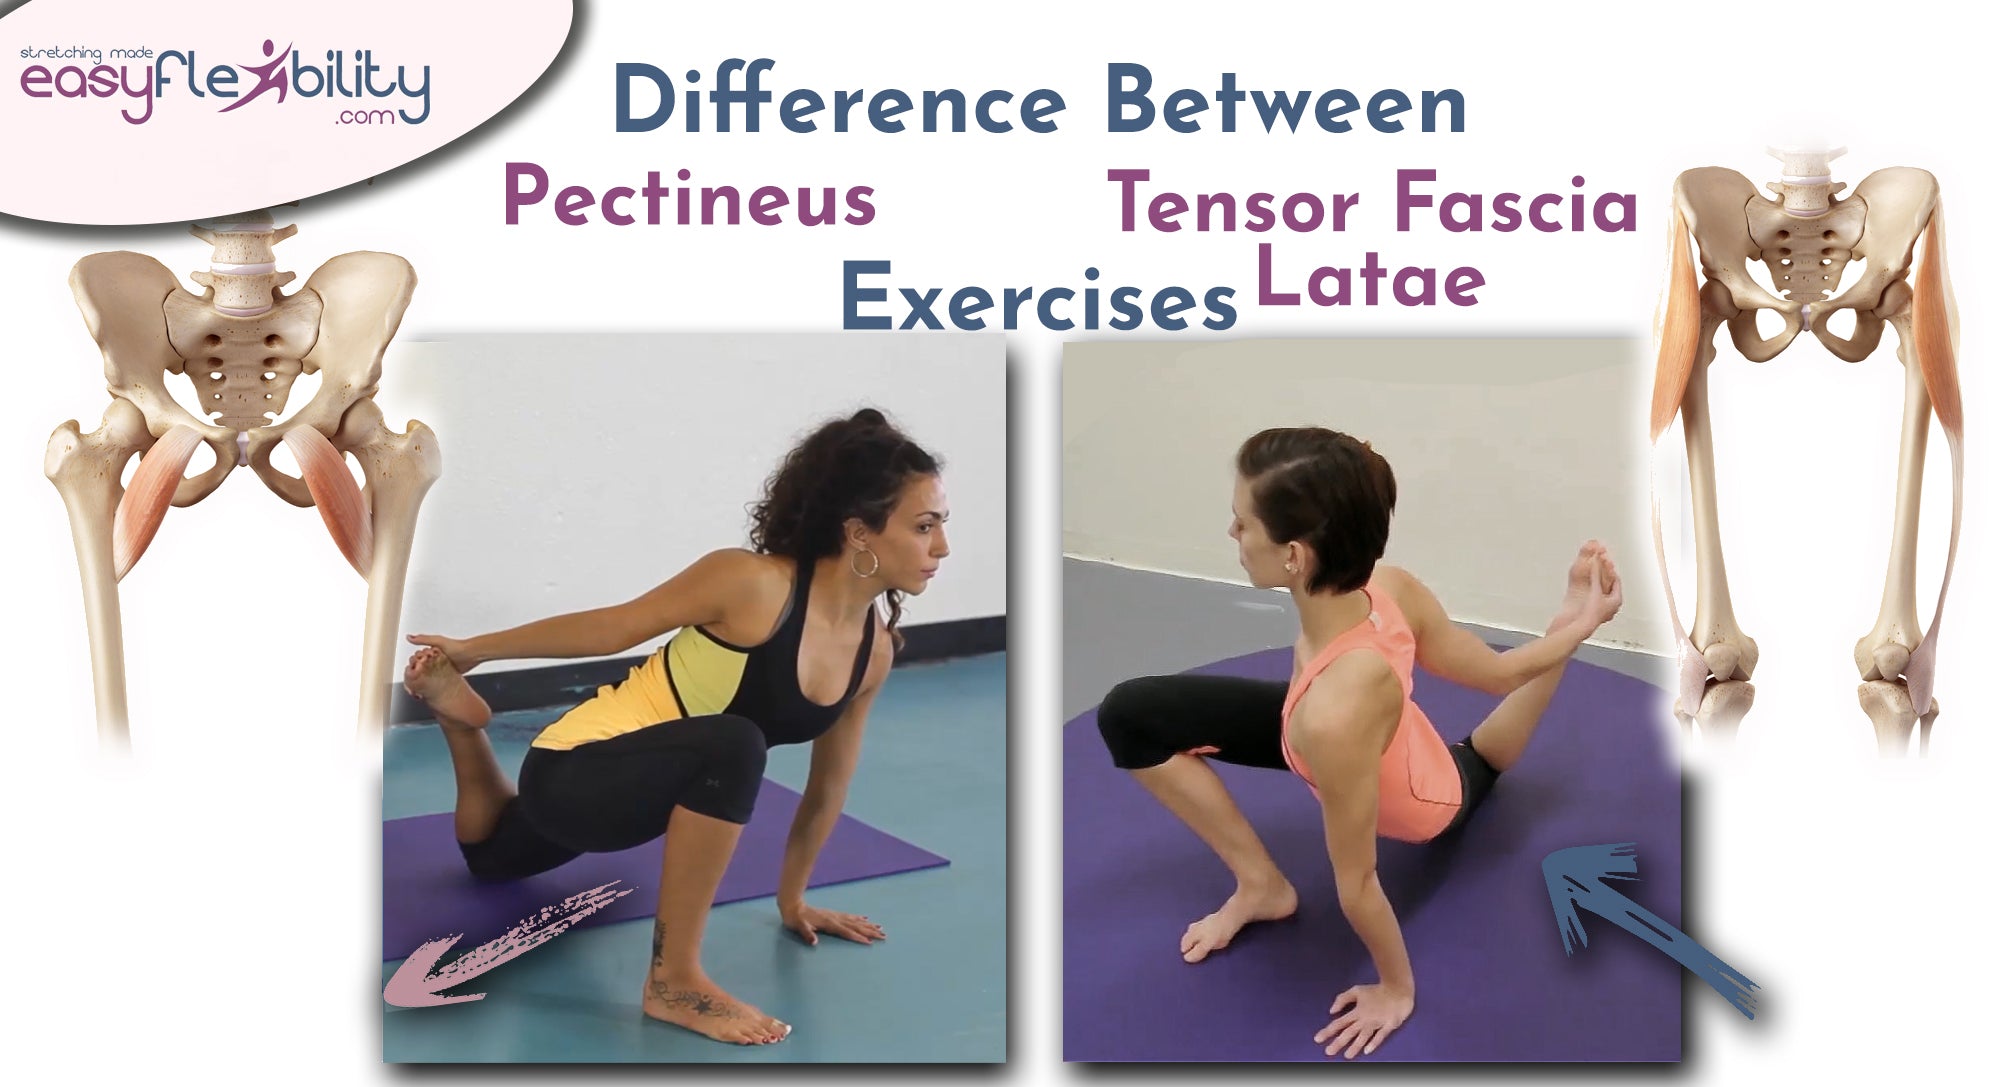 Differences between Pectineus ZST and Tensor fascia latae ZST